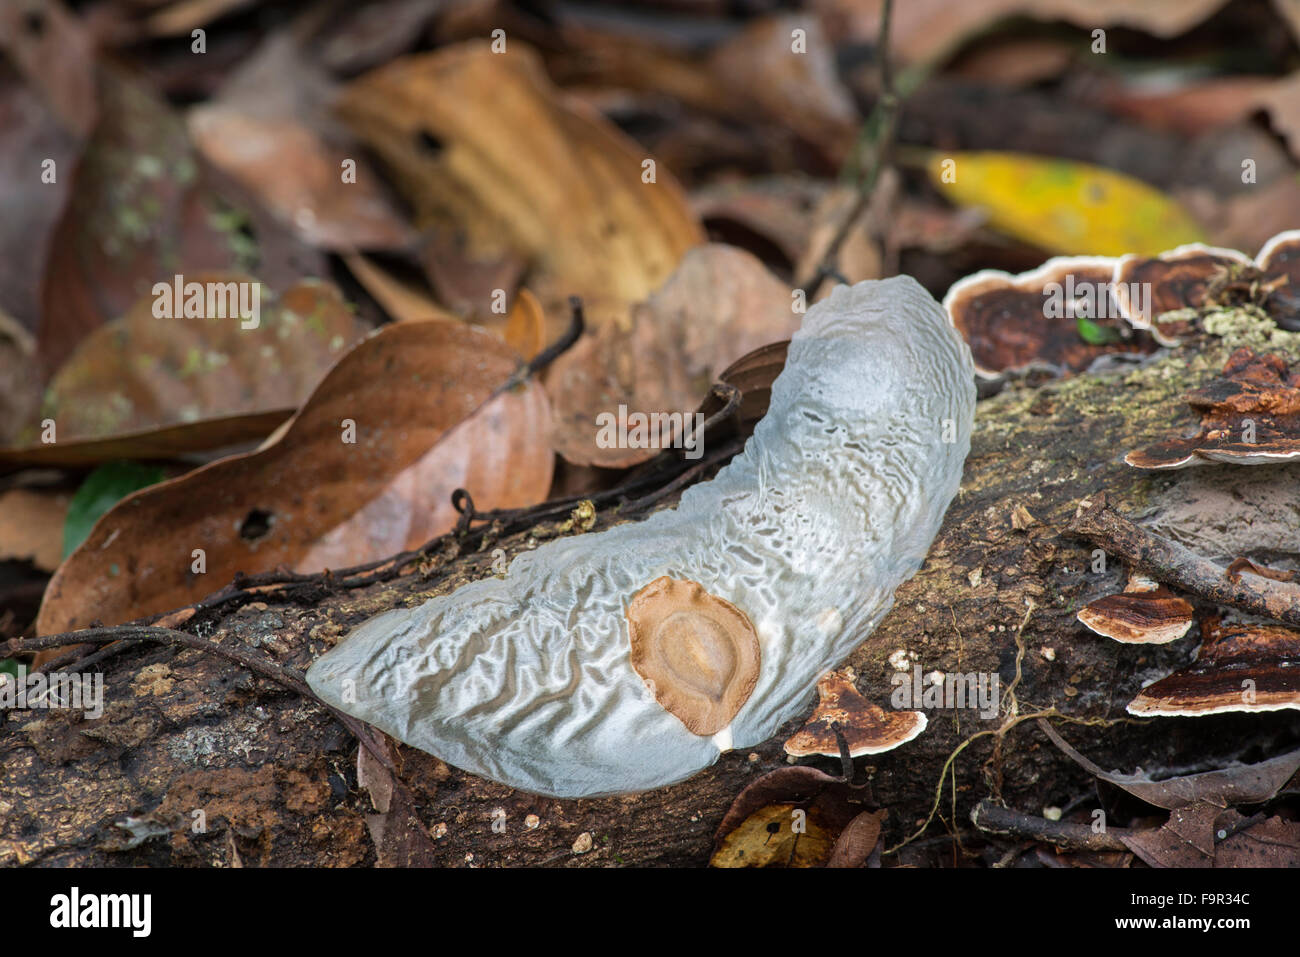 Alsomitra macrocarpa, Sabah, Borneo. Large winged seed on floor of tropical rain forest Stock Photo